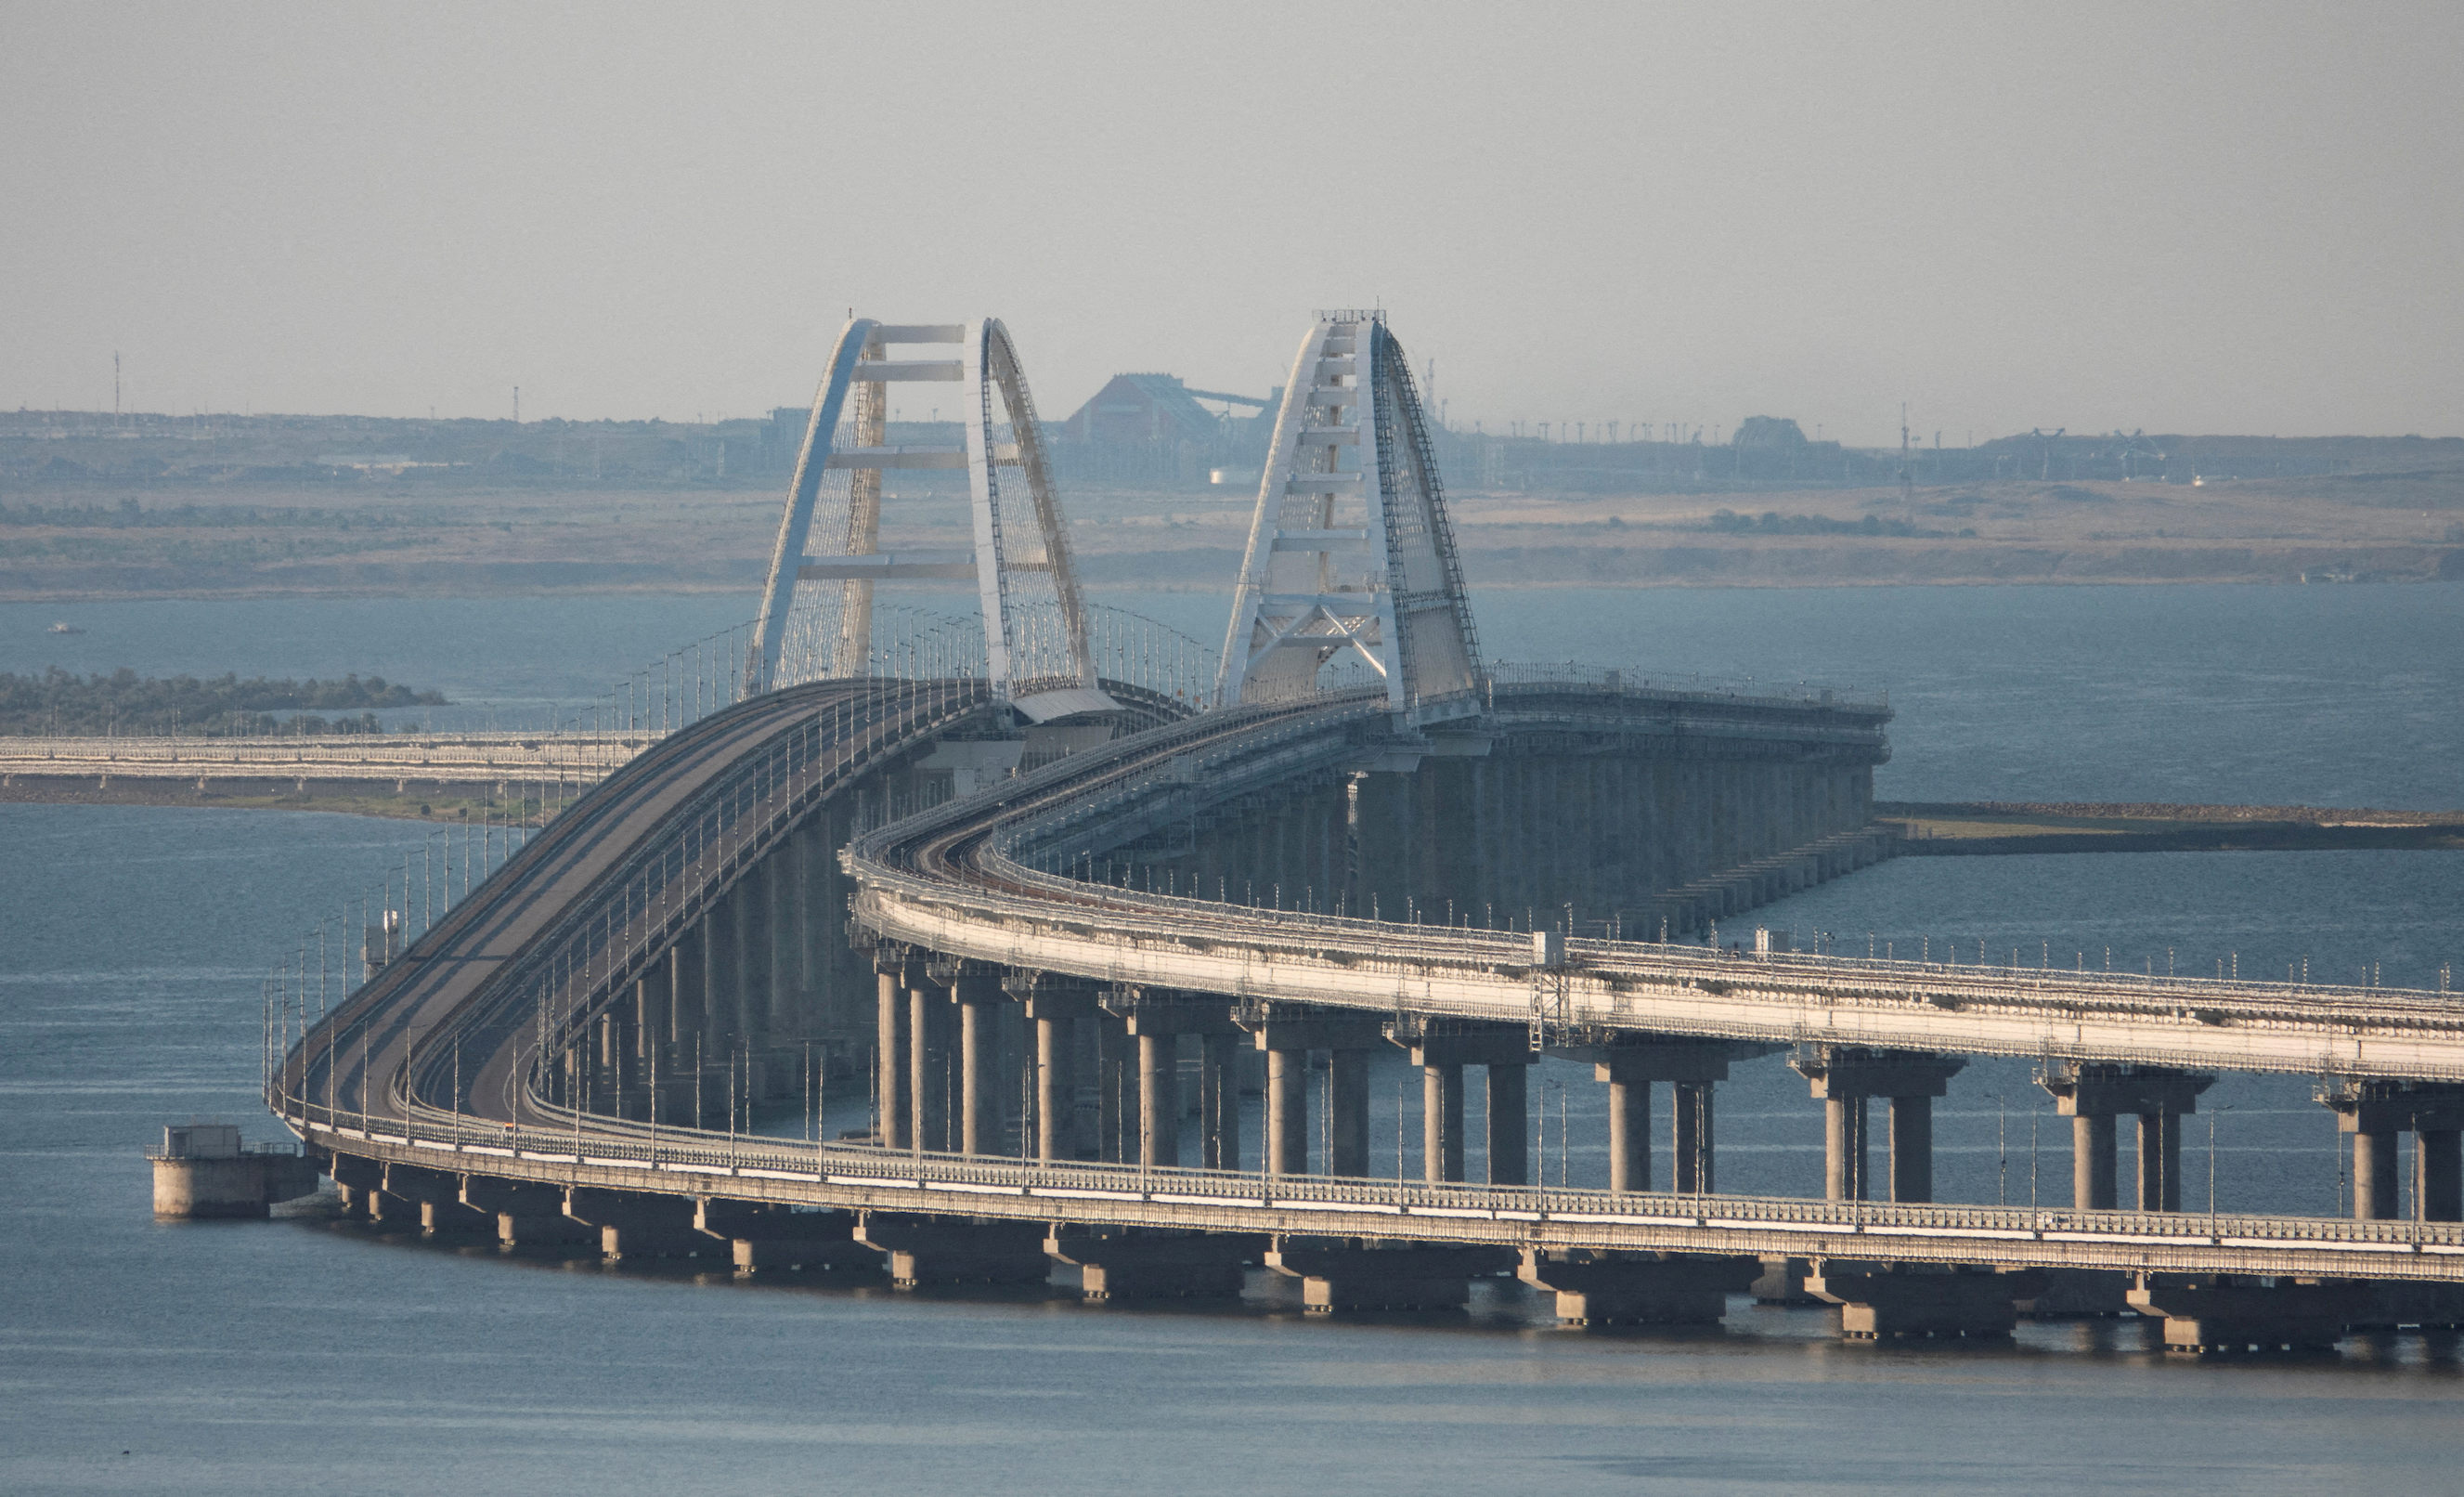 A view shows the Crimean bridge connecting the Russian mainland with the peninsula across the Kerch Strait, Crimea